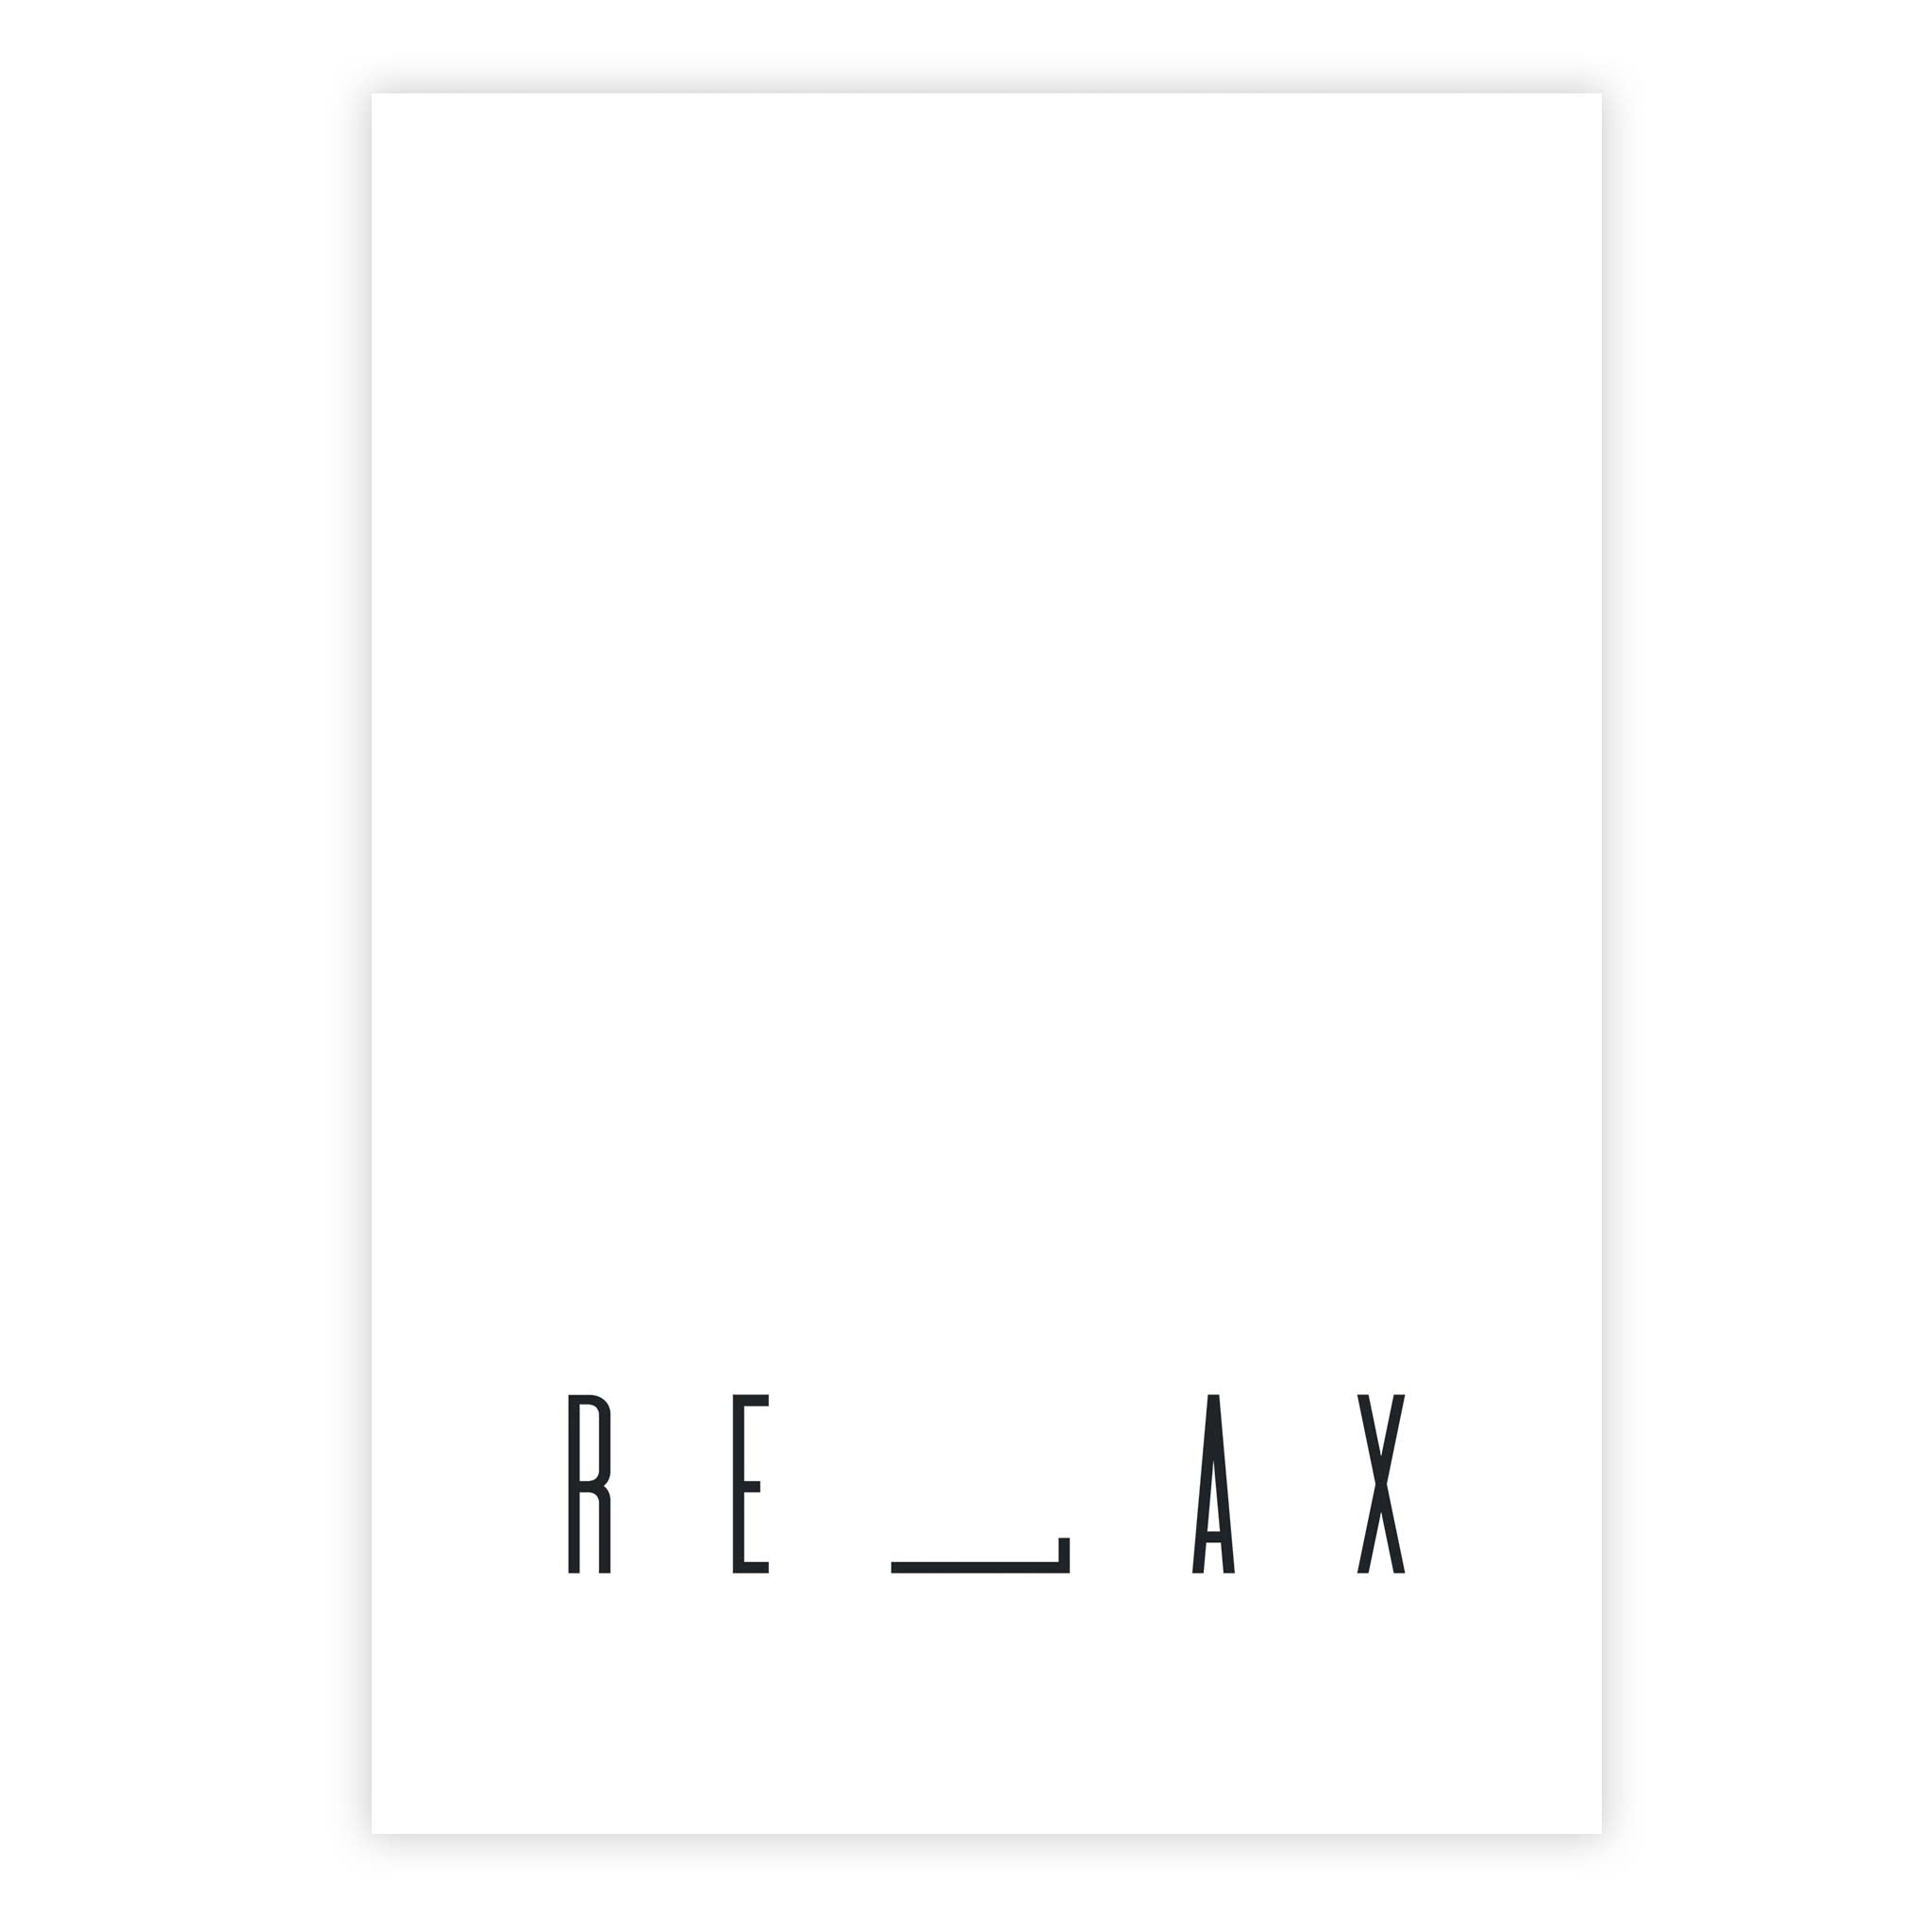 Relax (l on its side)